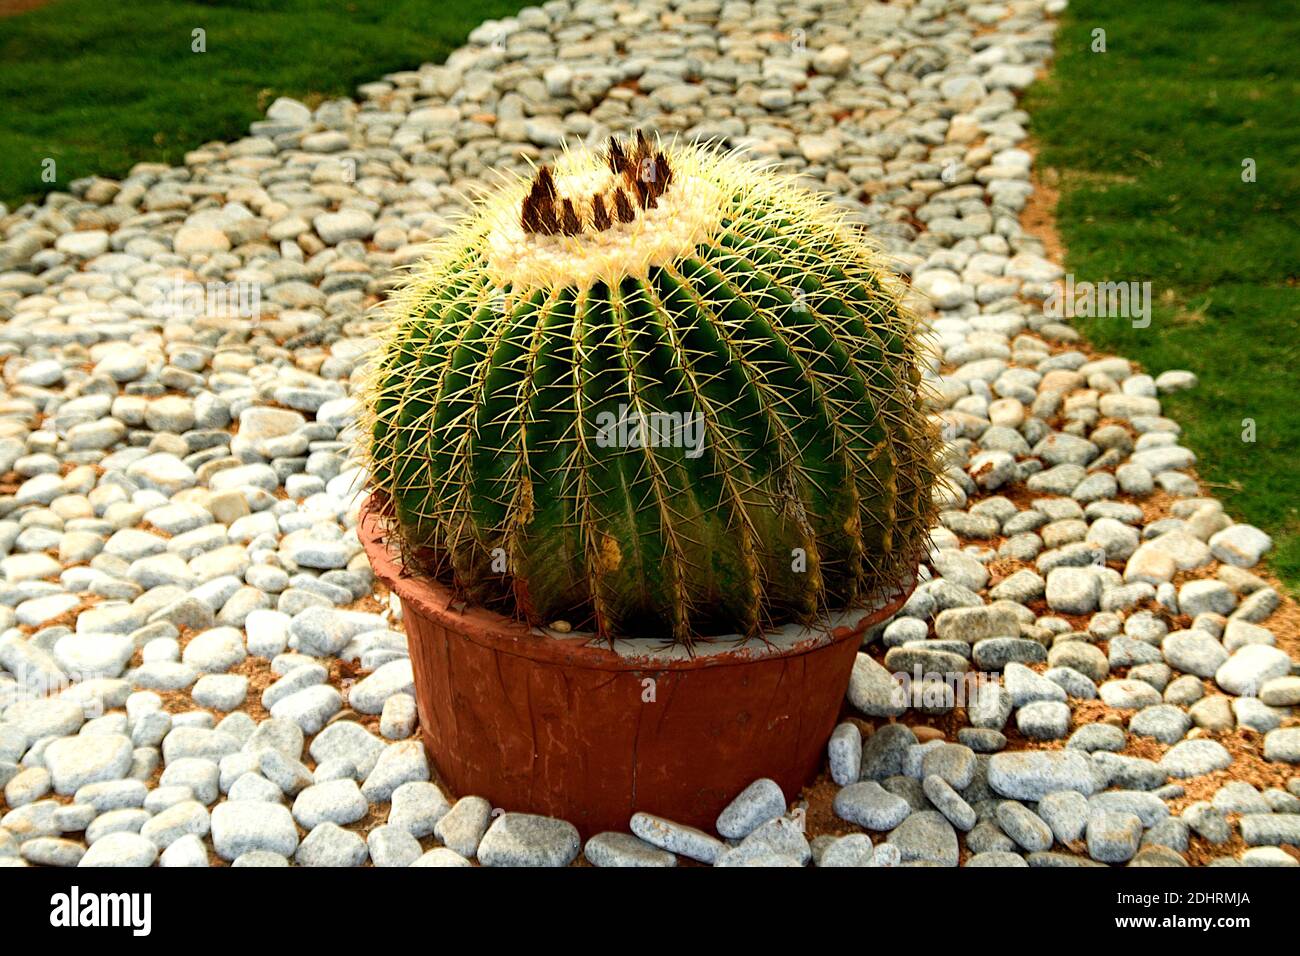 Arrangement of cactus plant in red earthen pot placed on pebbled floor at Republic Day Flower Show in Lalbagh, Bengaluru, Karnataka, India, Asia Stock Photo